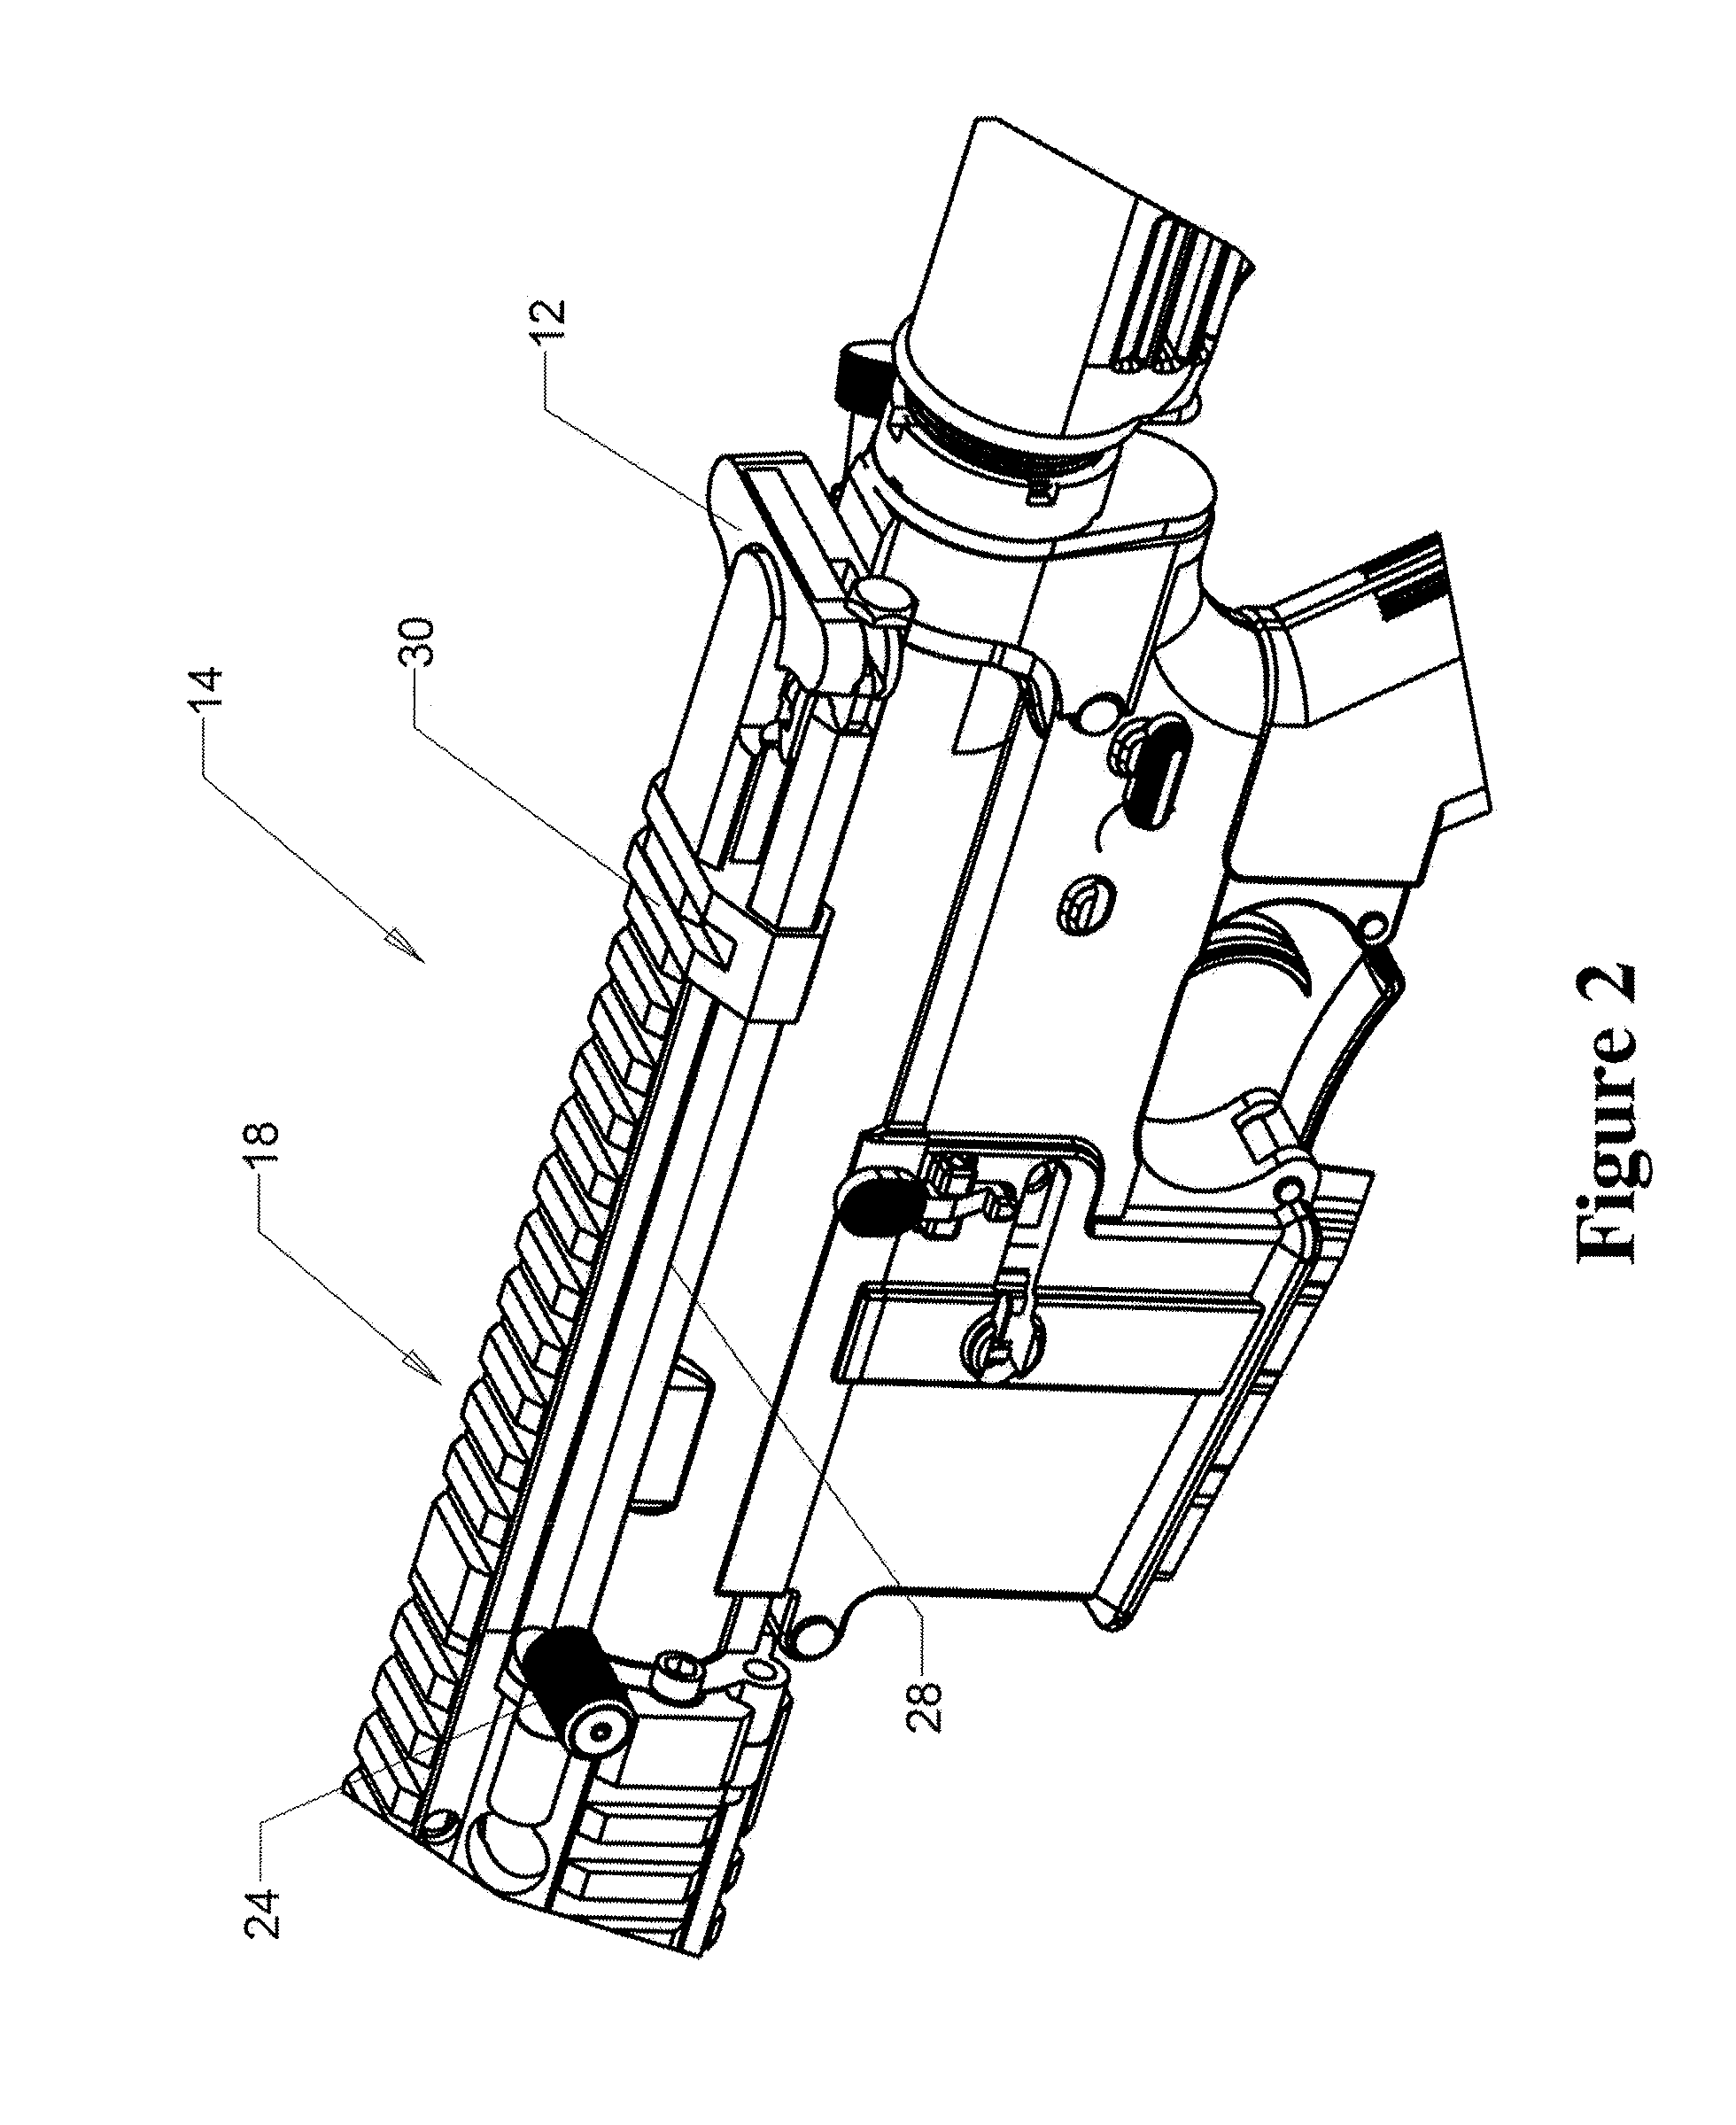 Charging Handle Accessory for Firearm